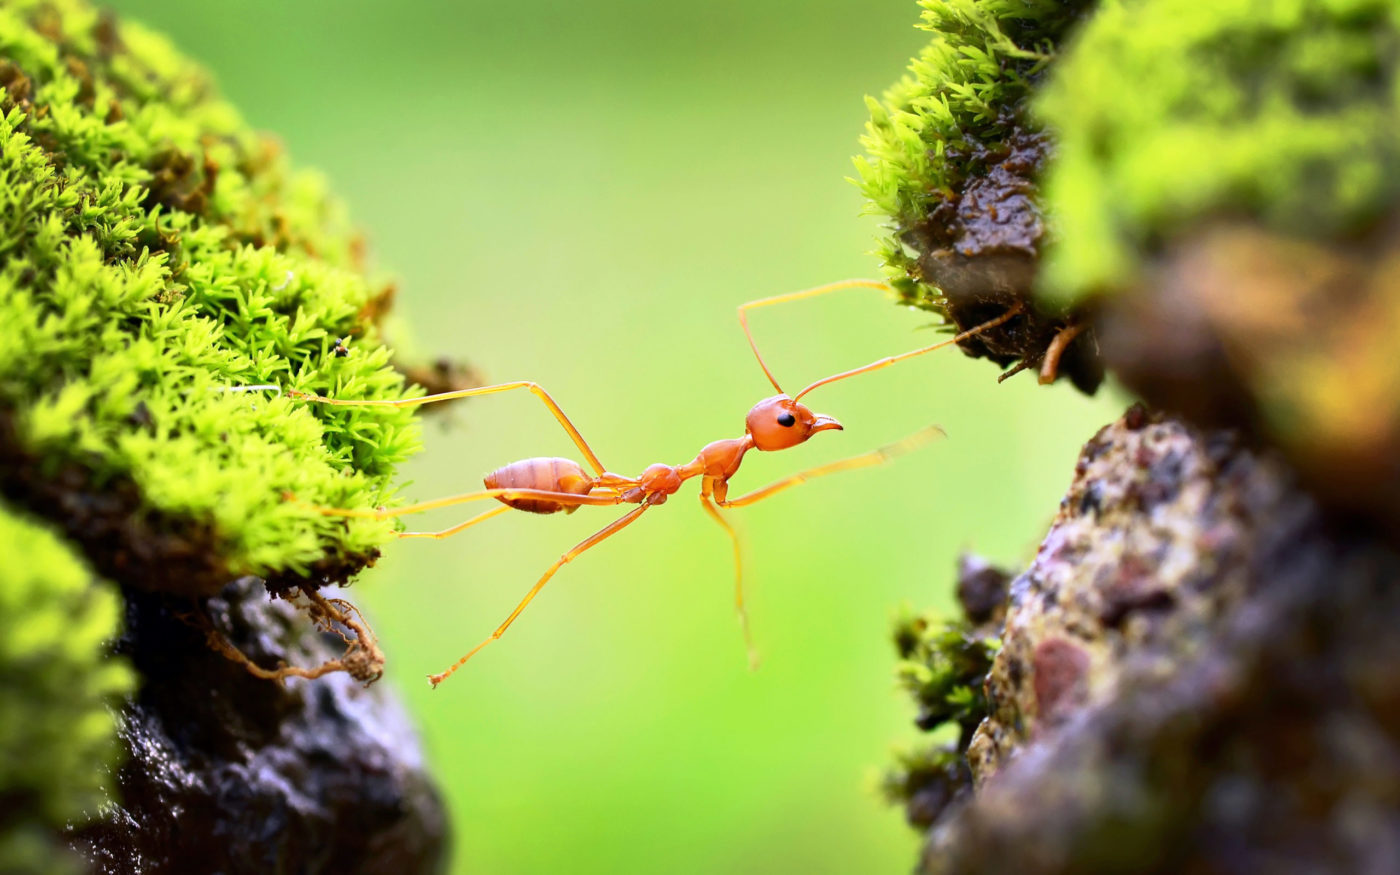 A fire ant is crossing at full stretch between two mossy stones